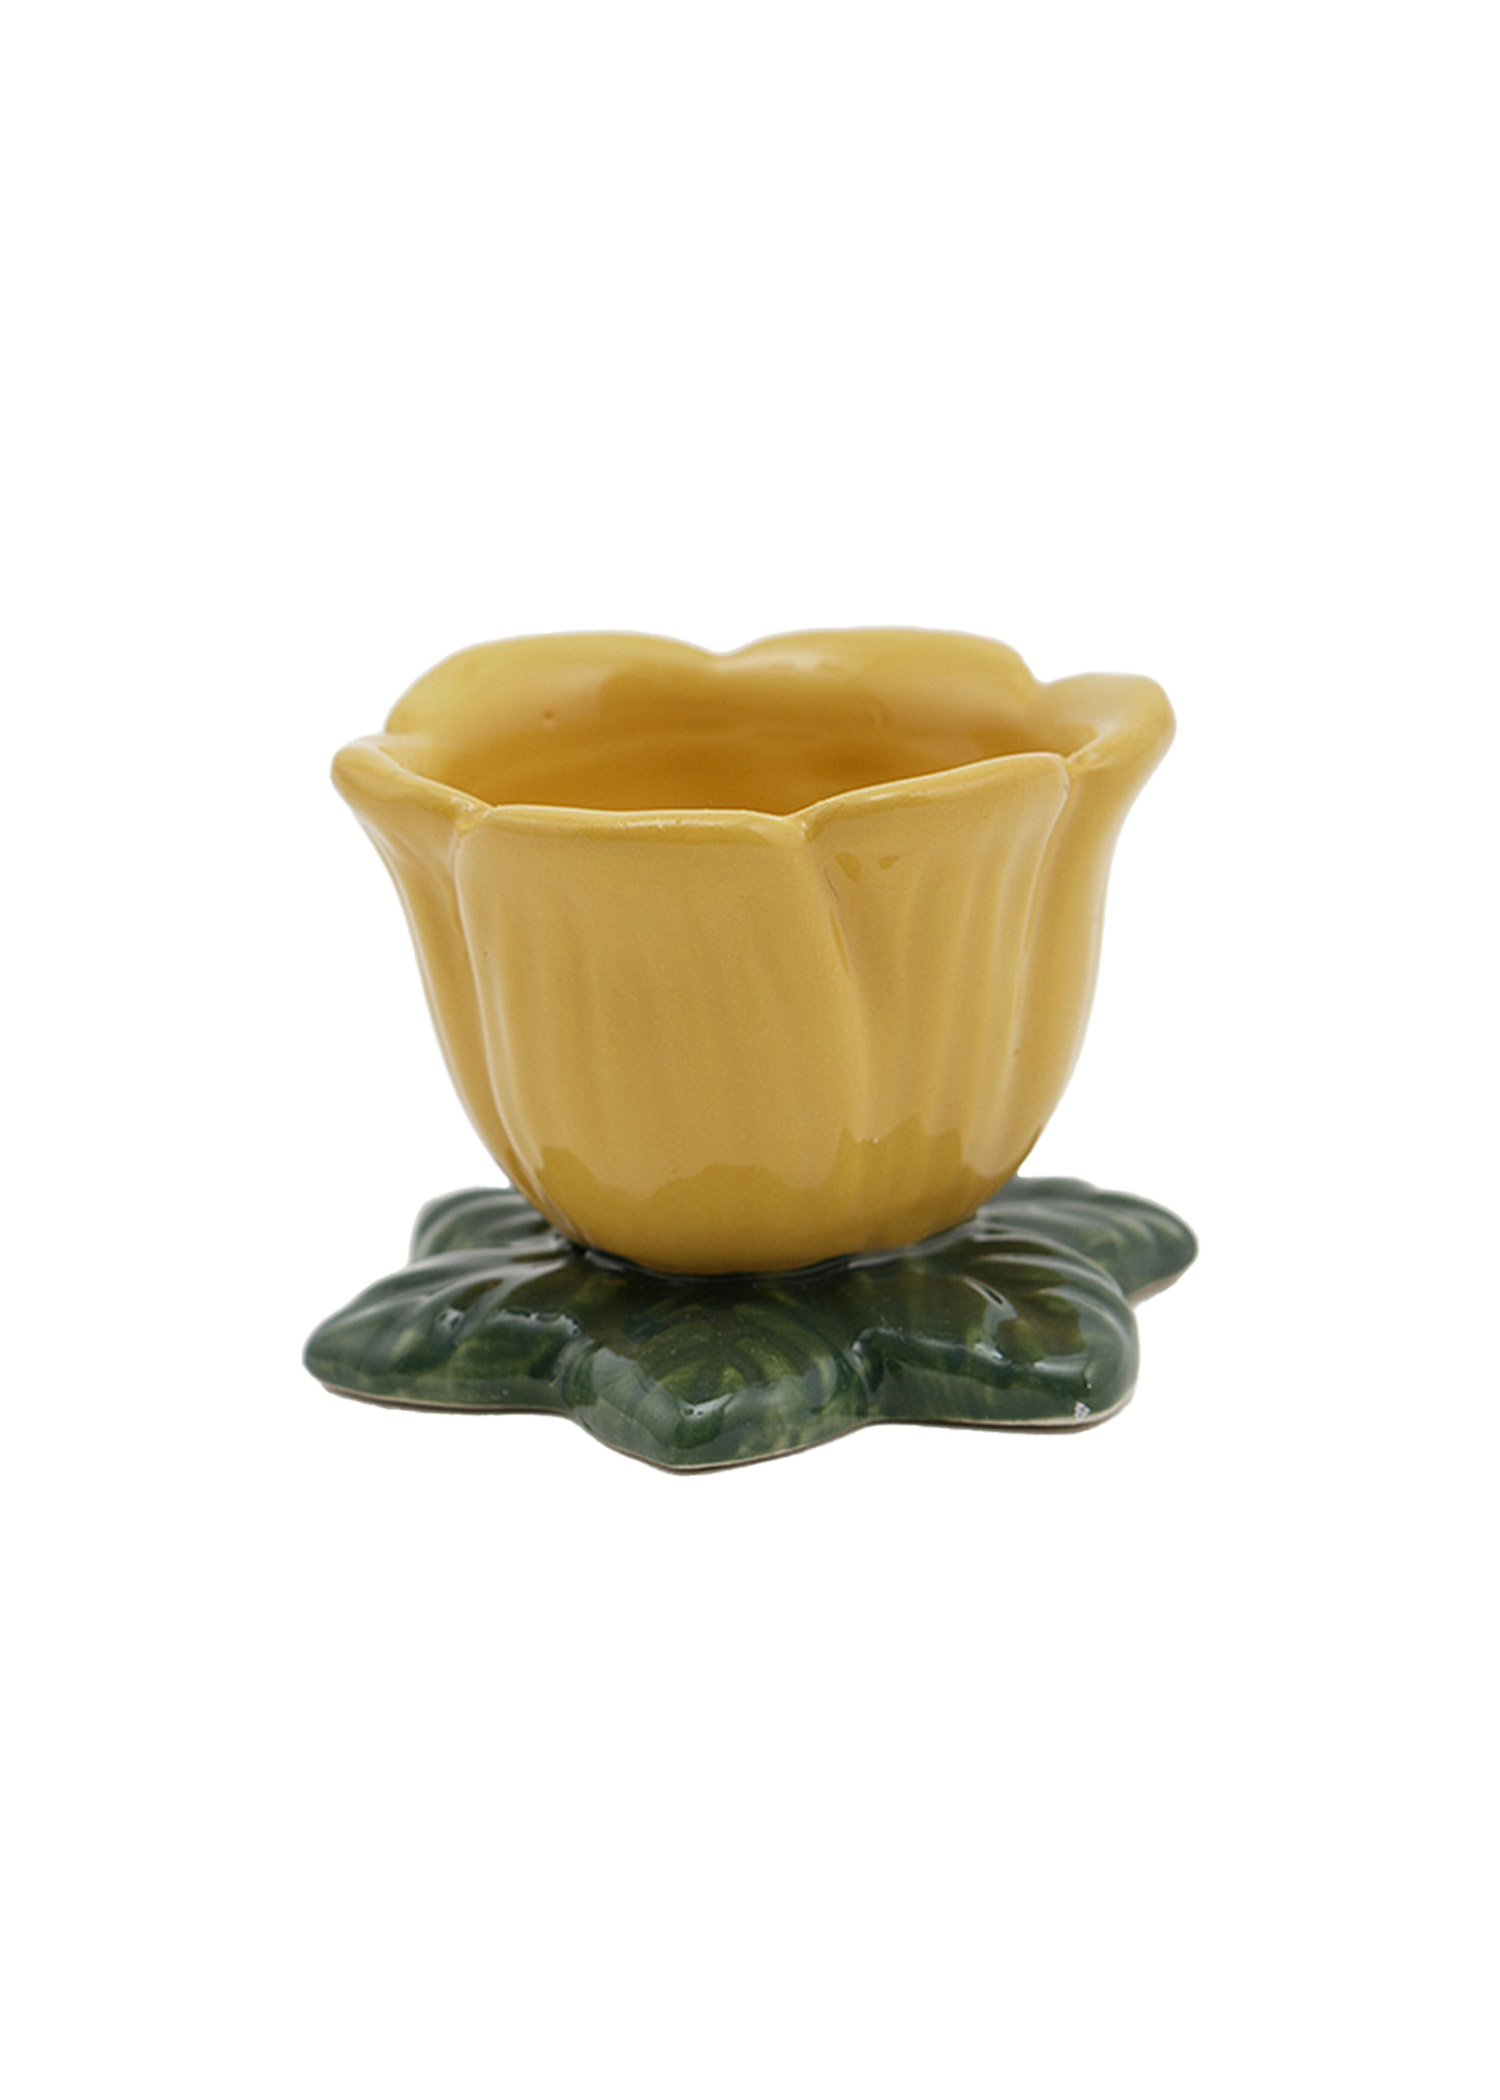 Tulip shaped egg cup Image 0